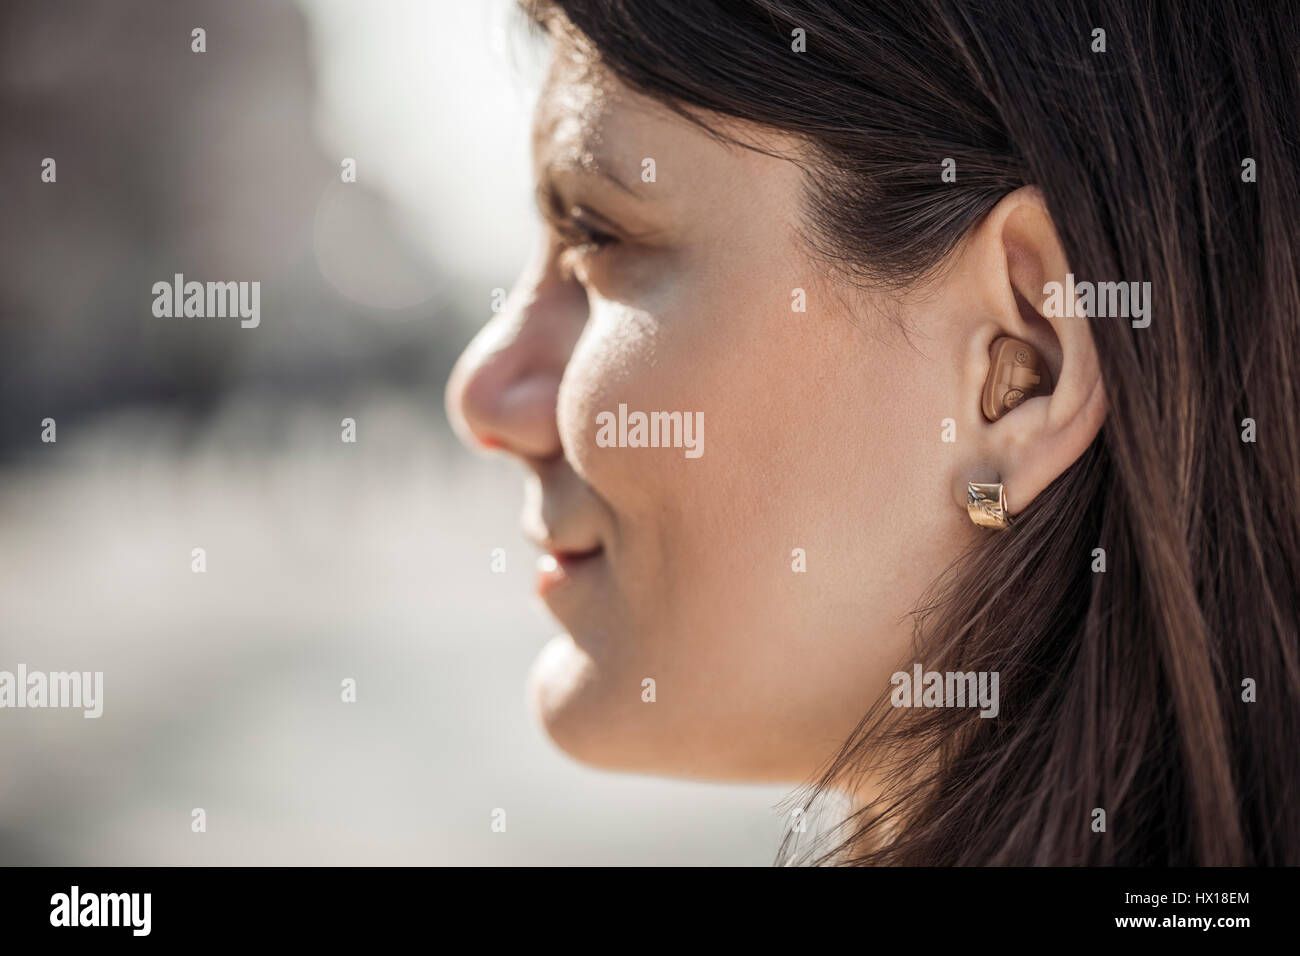 Young woman with hearing aid, close-up Stock Photo